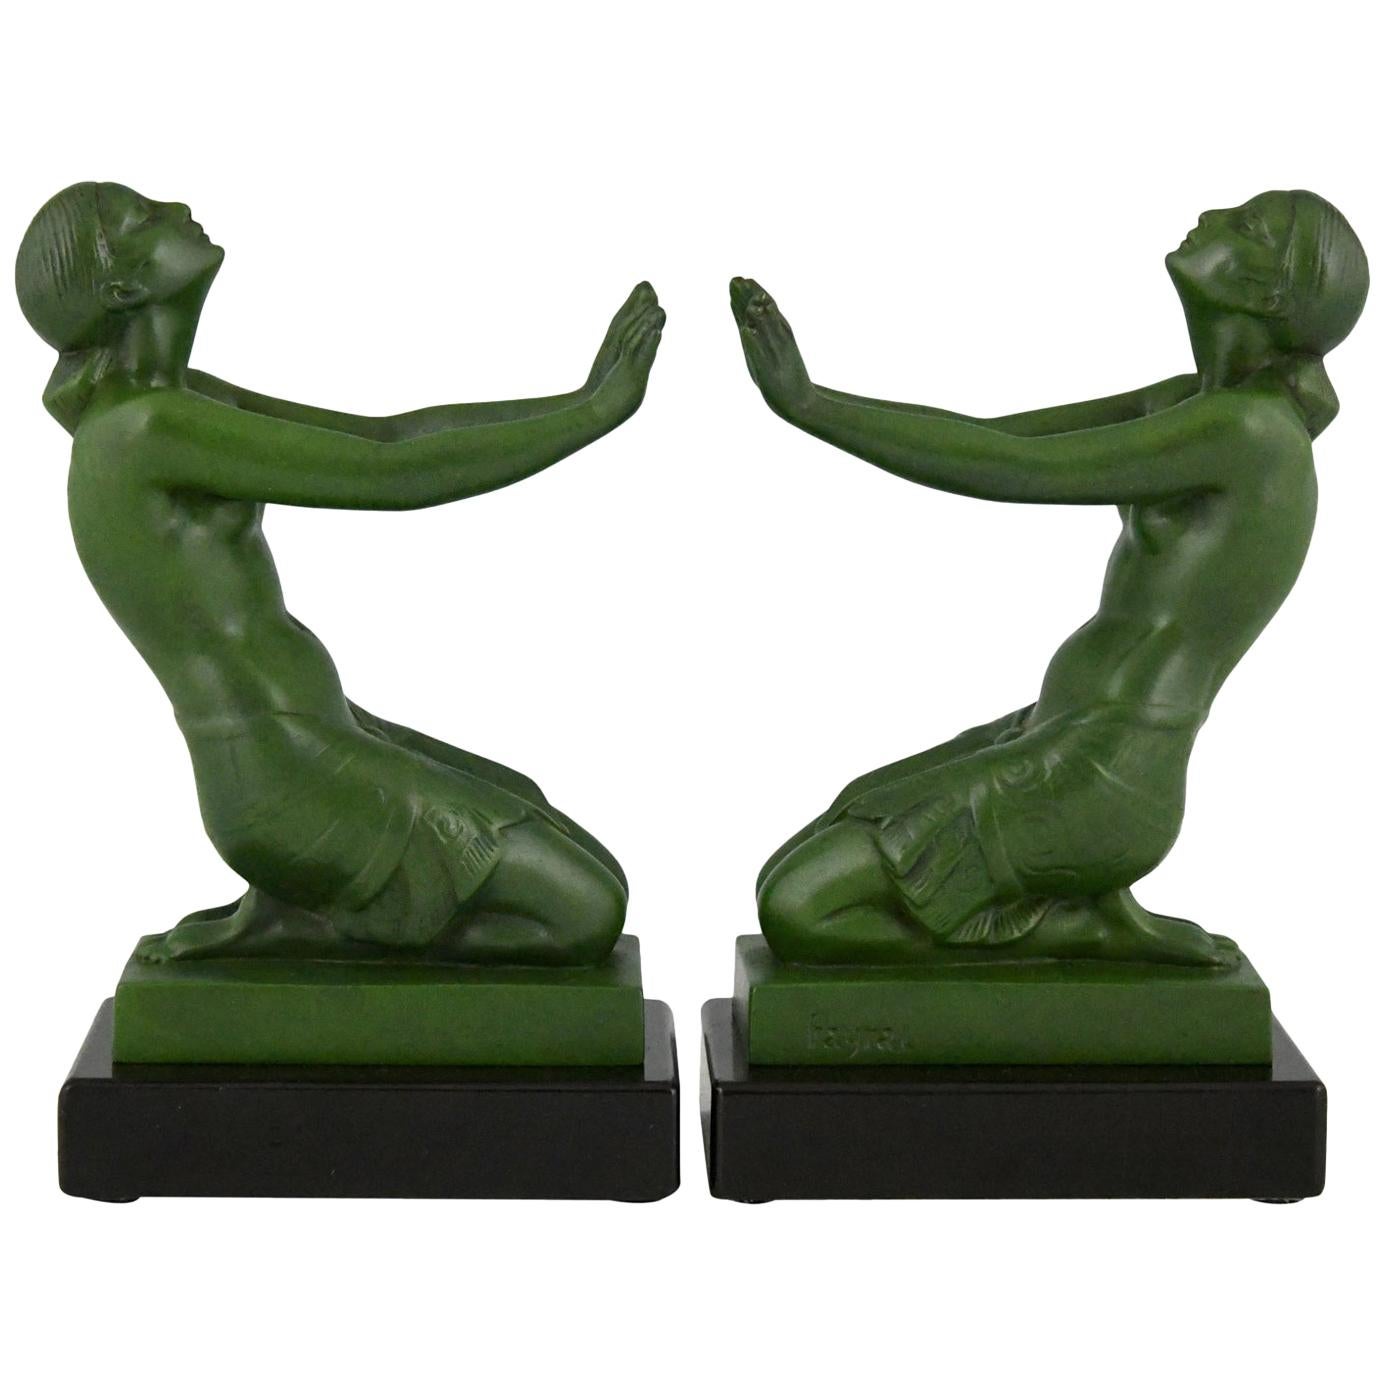 Art Deco Bookends Nudes Fayral, Pierre Le Faguays for Max Le Verrier France 1930